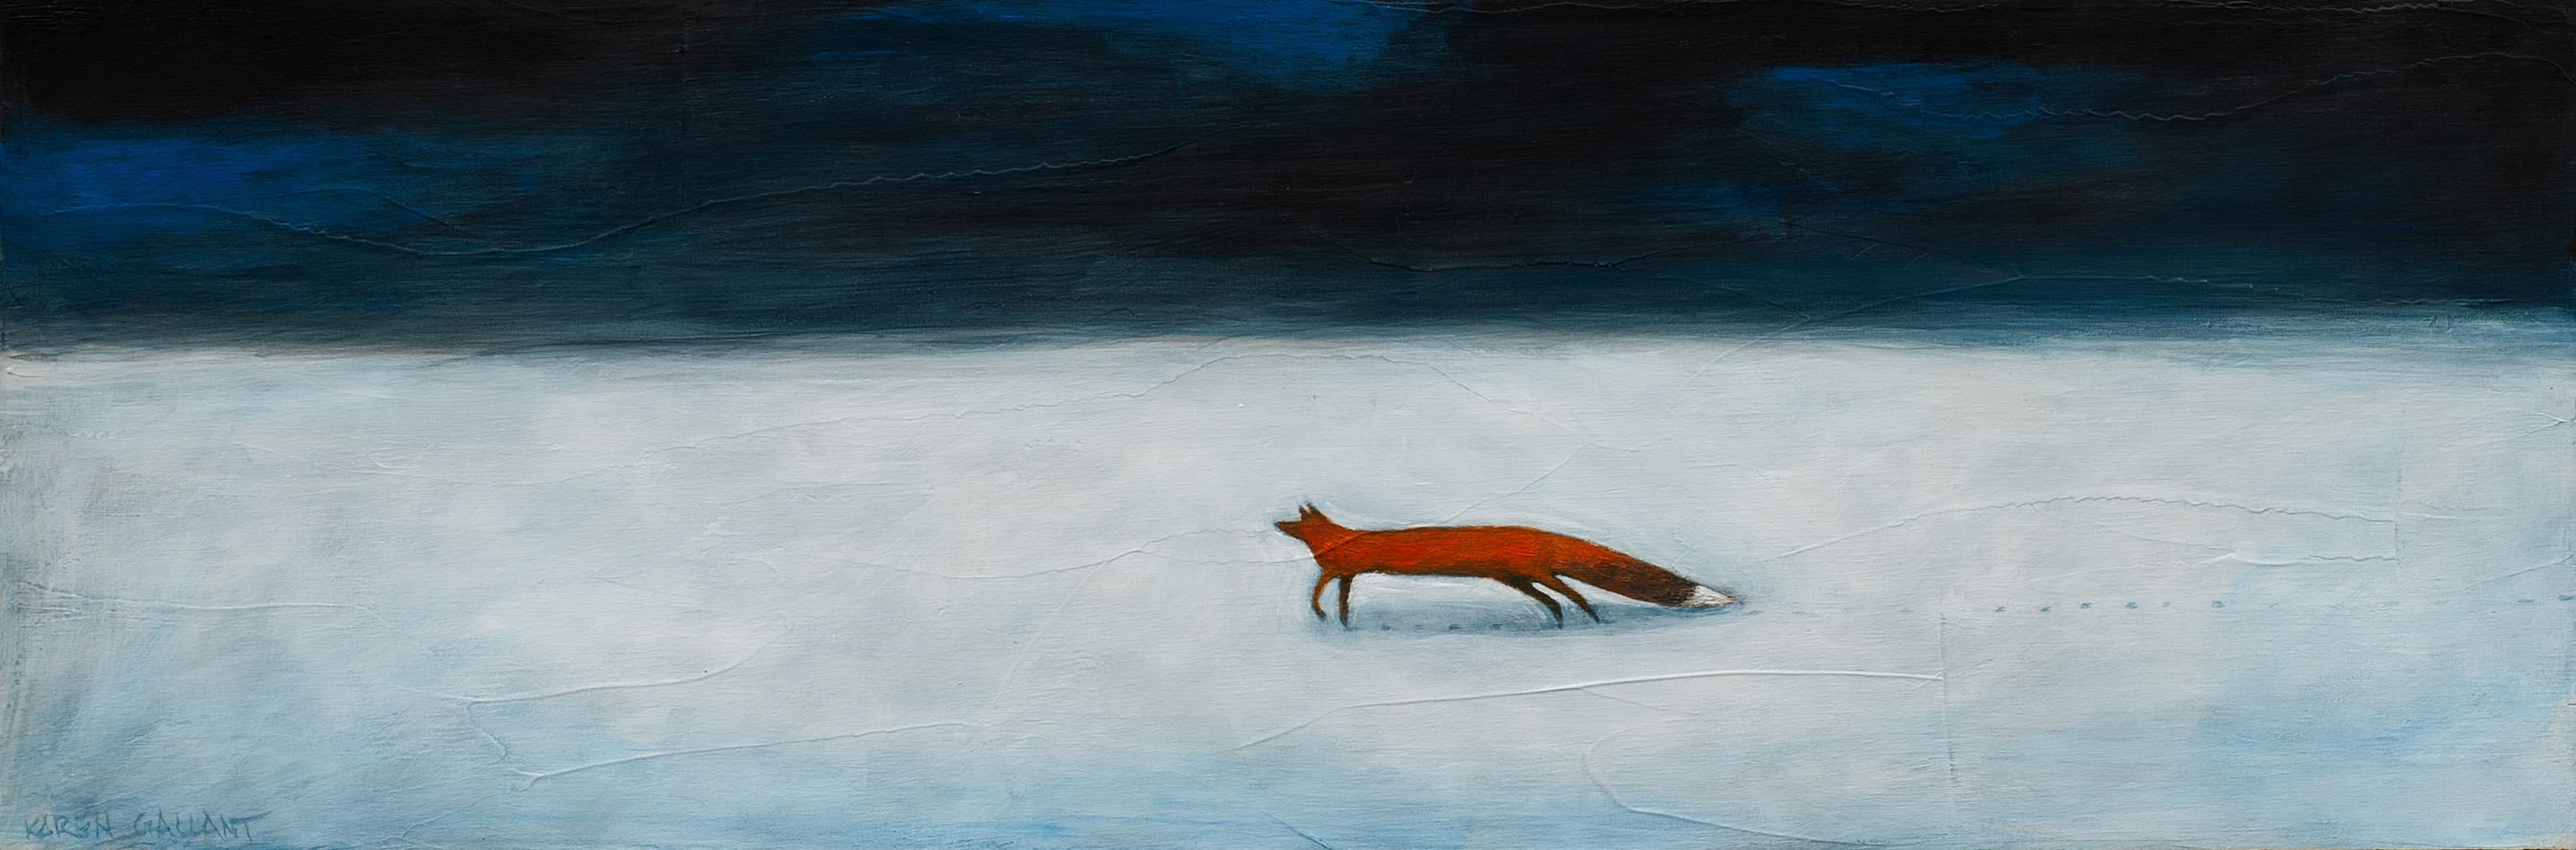 Fox In the snow